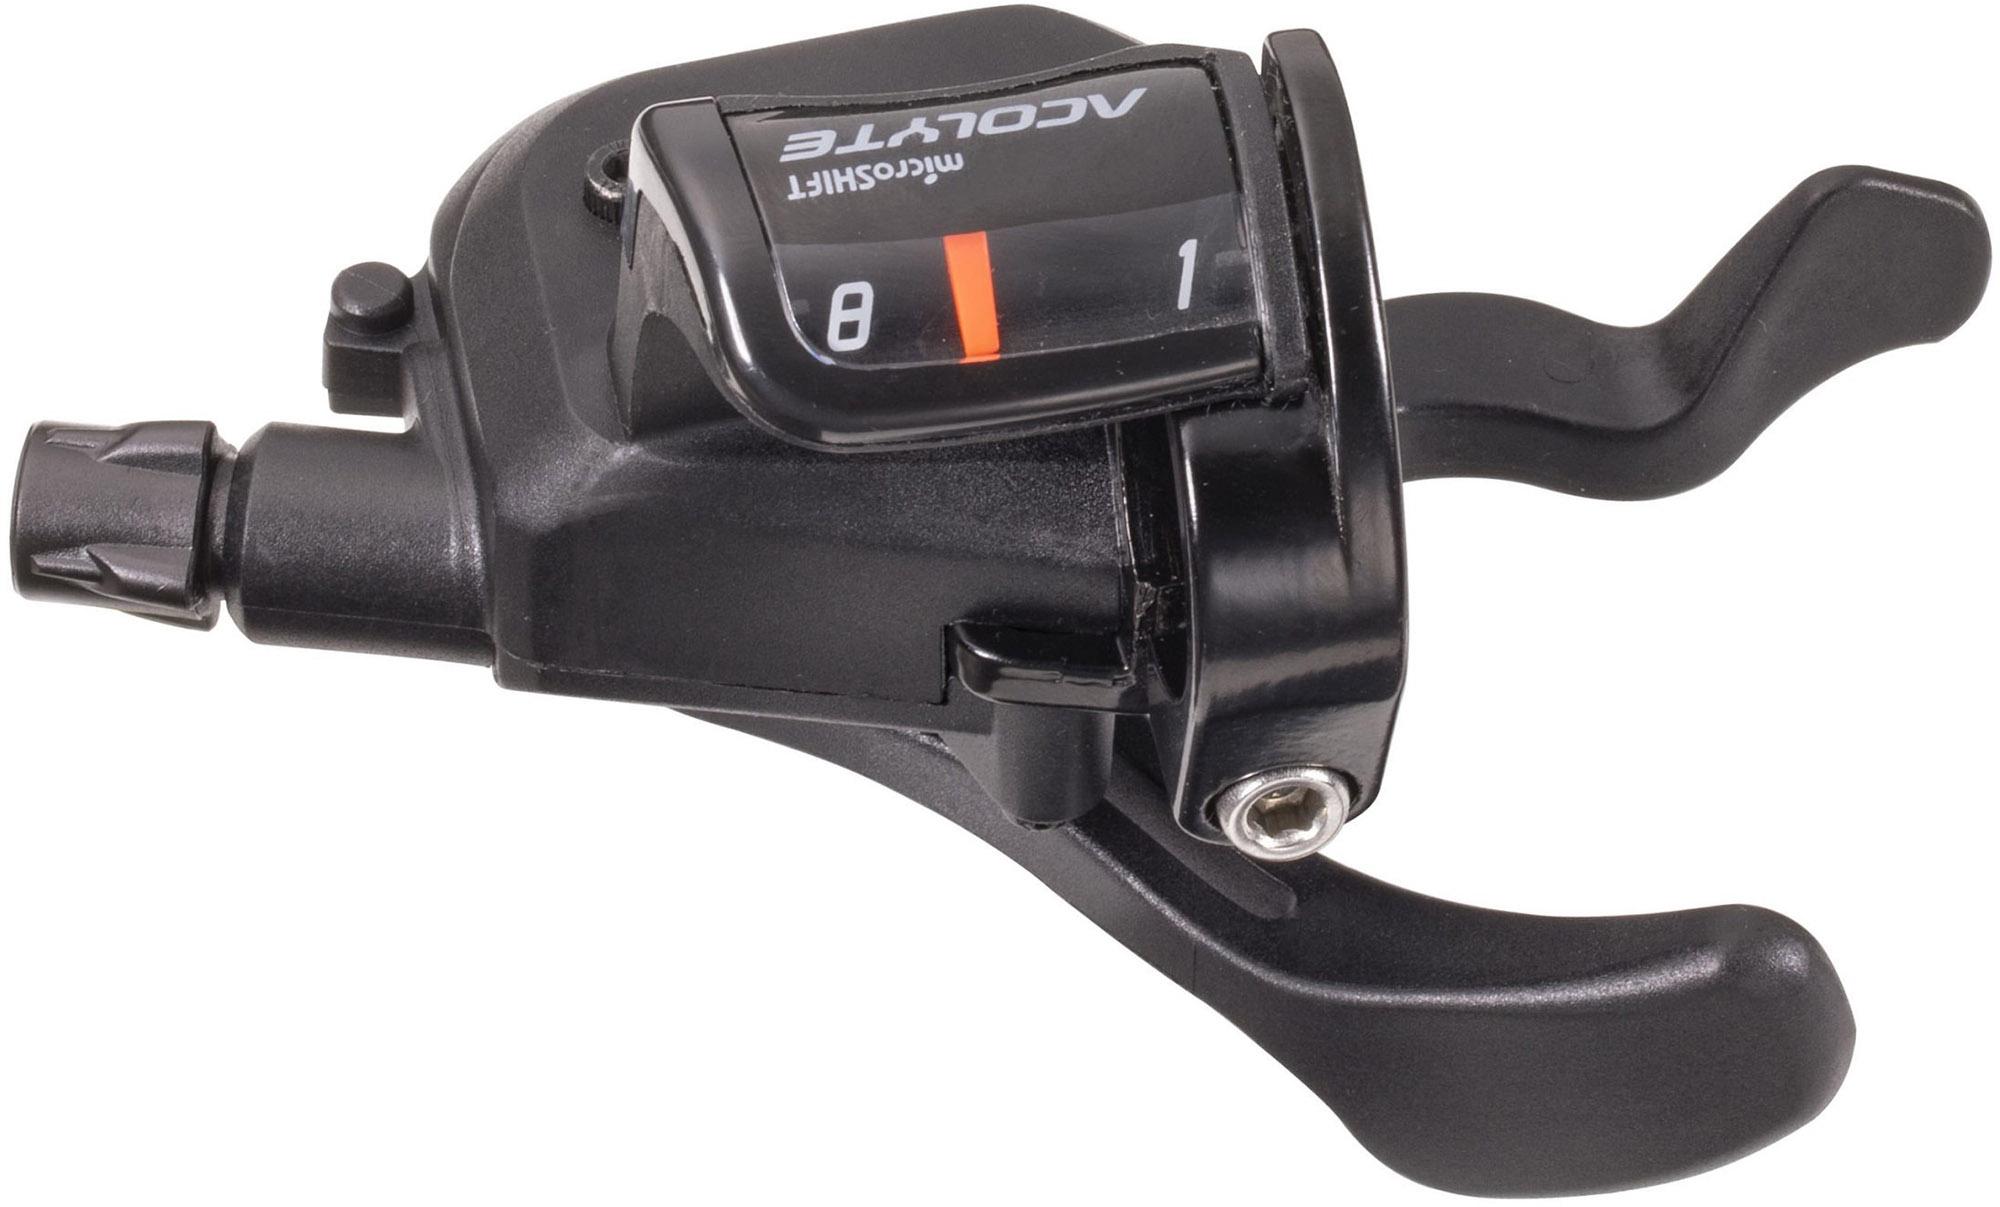 Microshift Acolyte M7180 8 Speed Trigger Shifter - Black